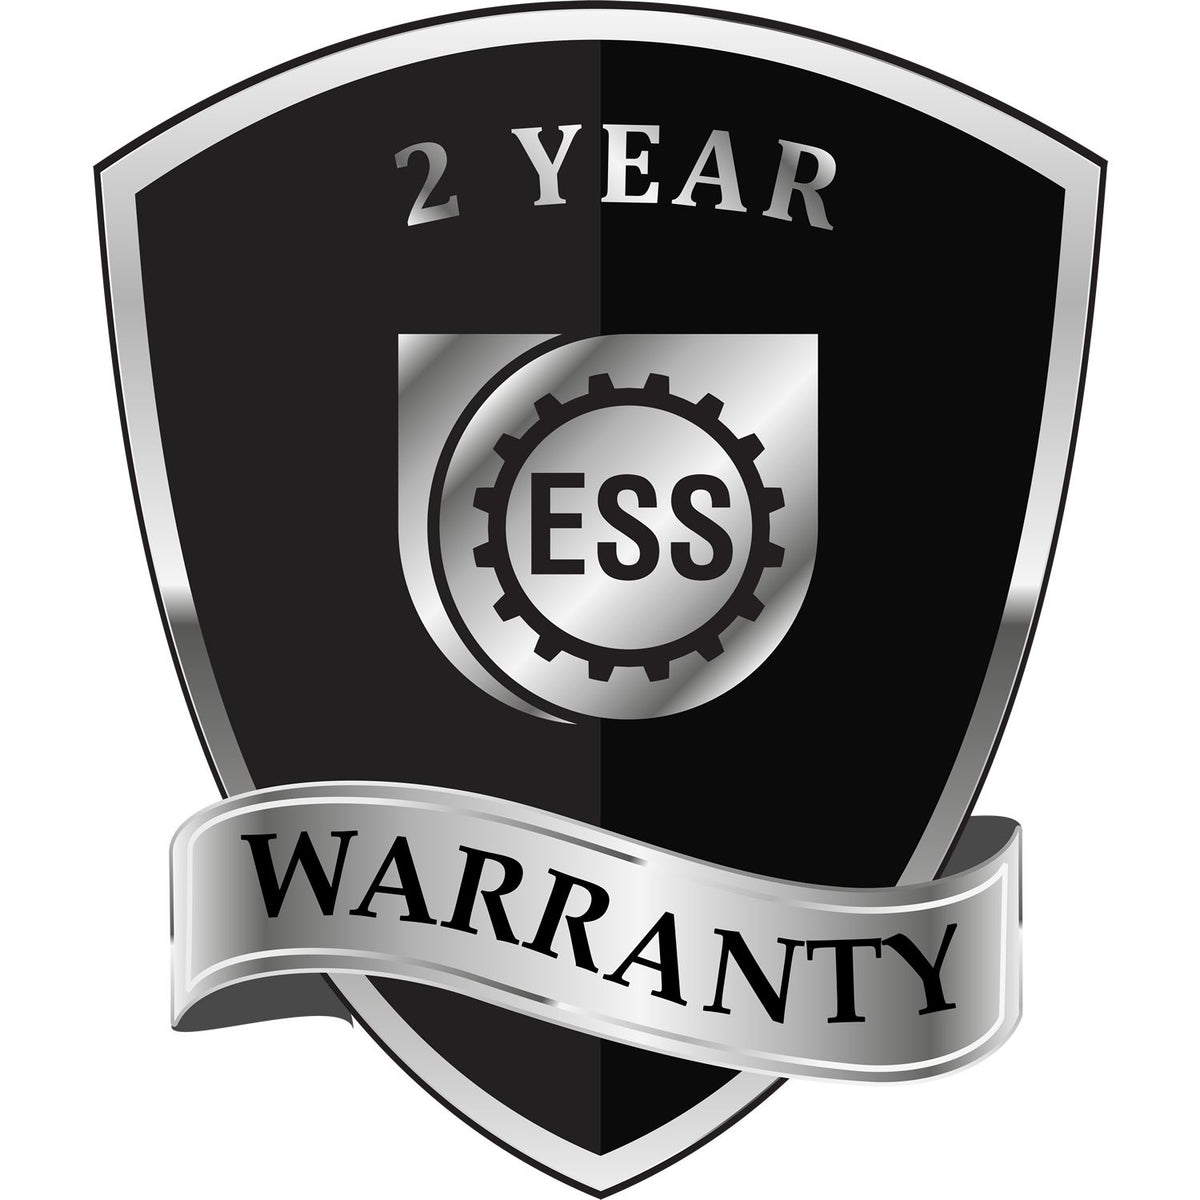 A black and silver badge or emblem showing warranty information for the Heavy Duty Cast Iron Michigan Geologist Seal Embosser